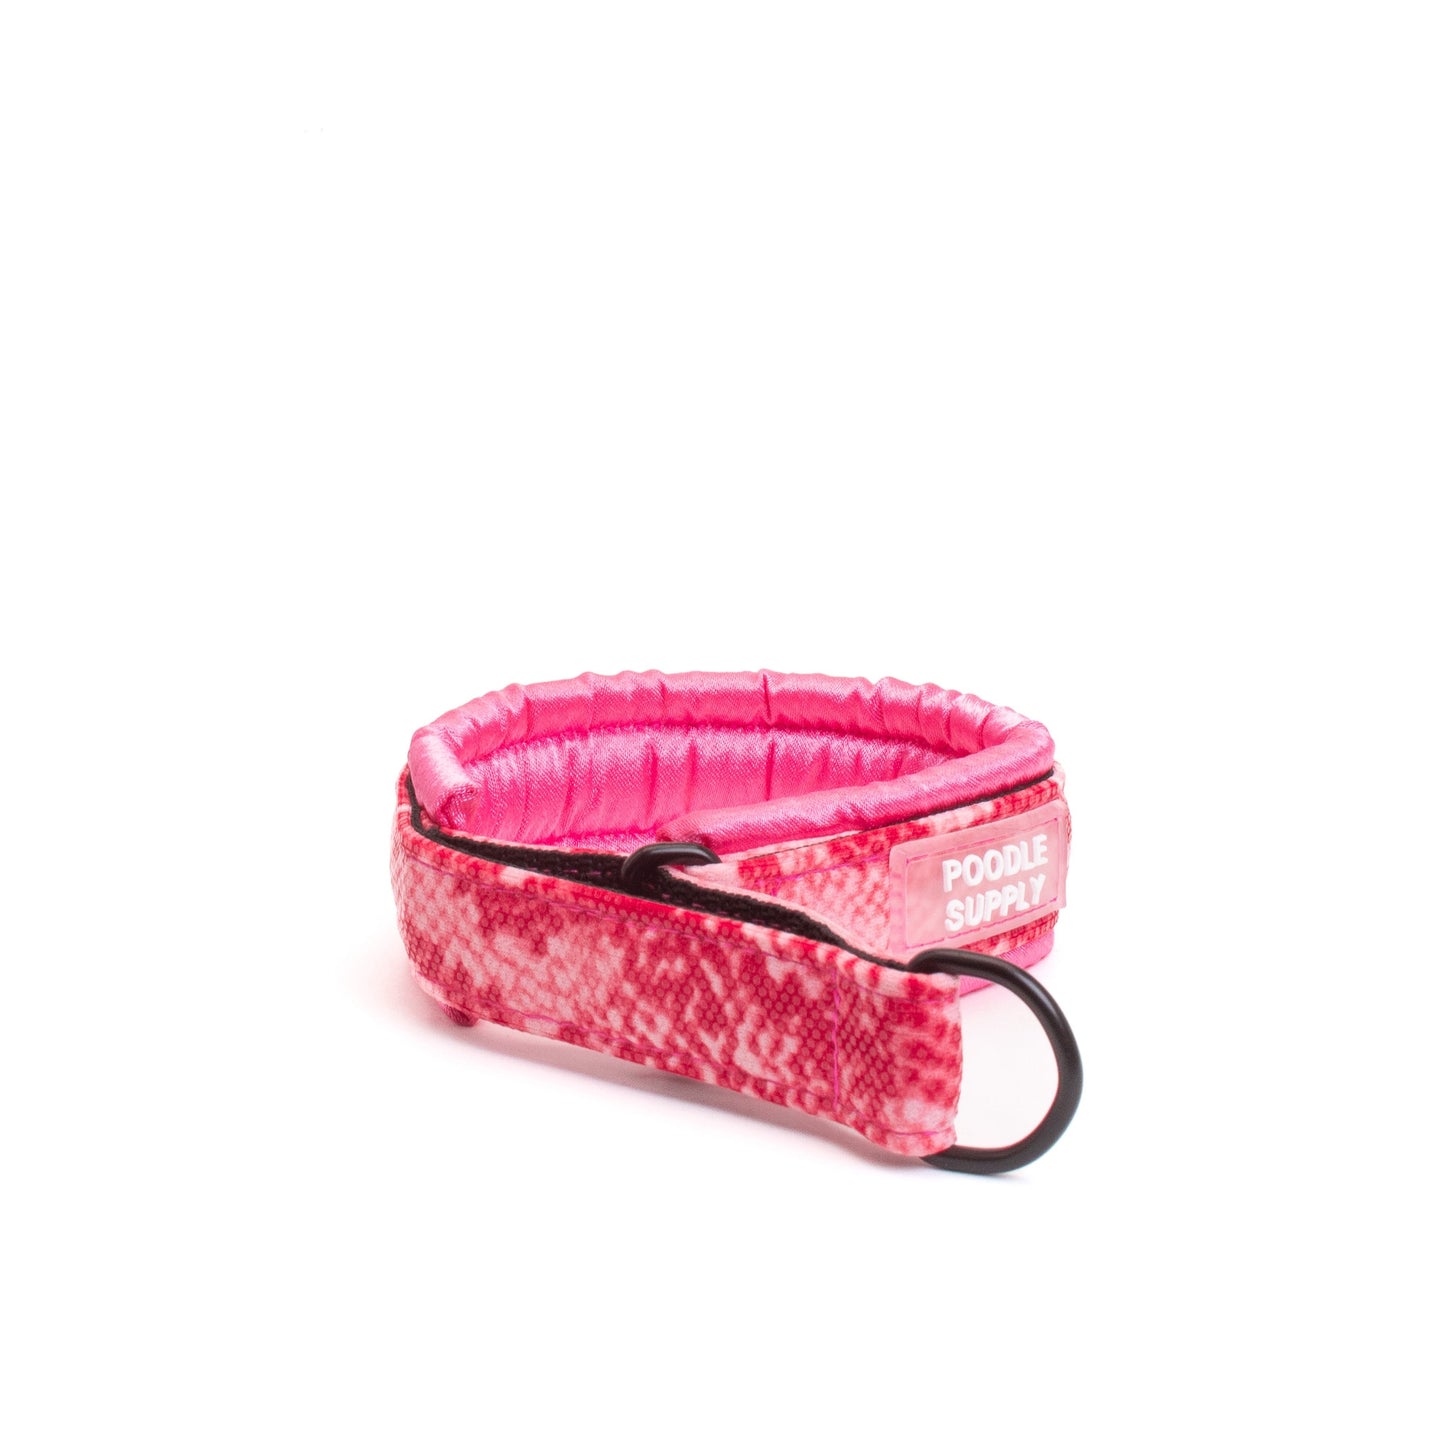 Small / Medium / Large Martingale Collar Poodle Supply Pink Snake